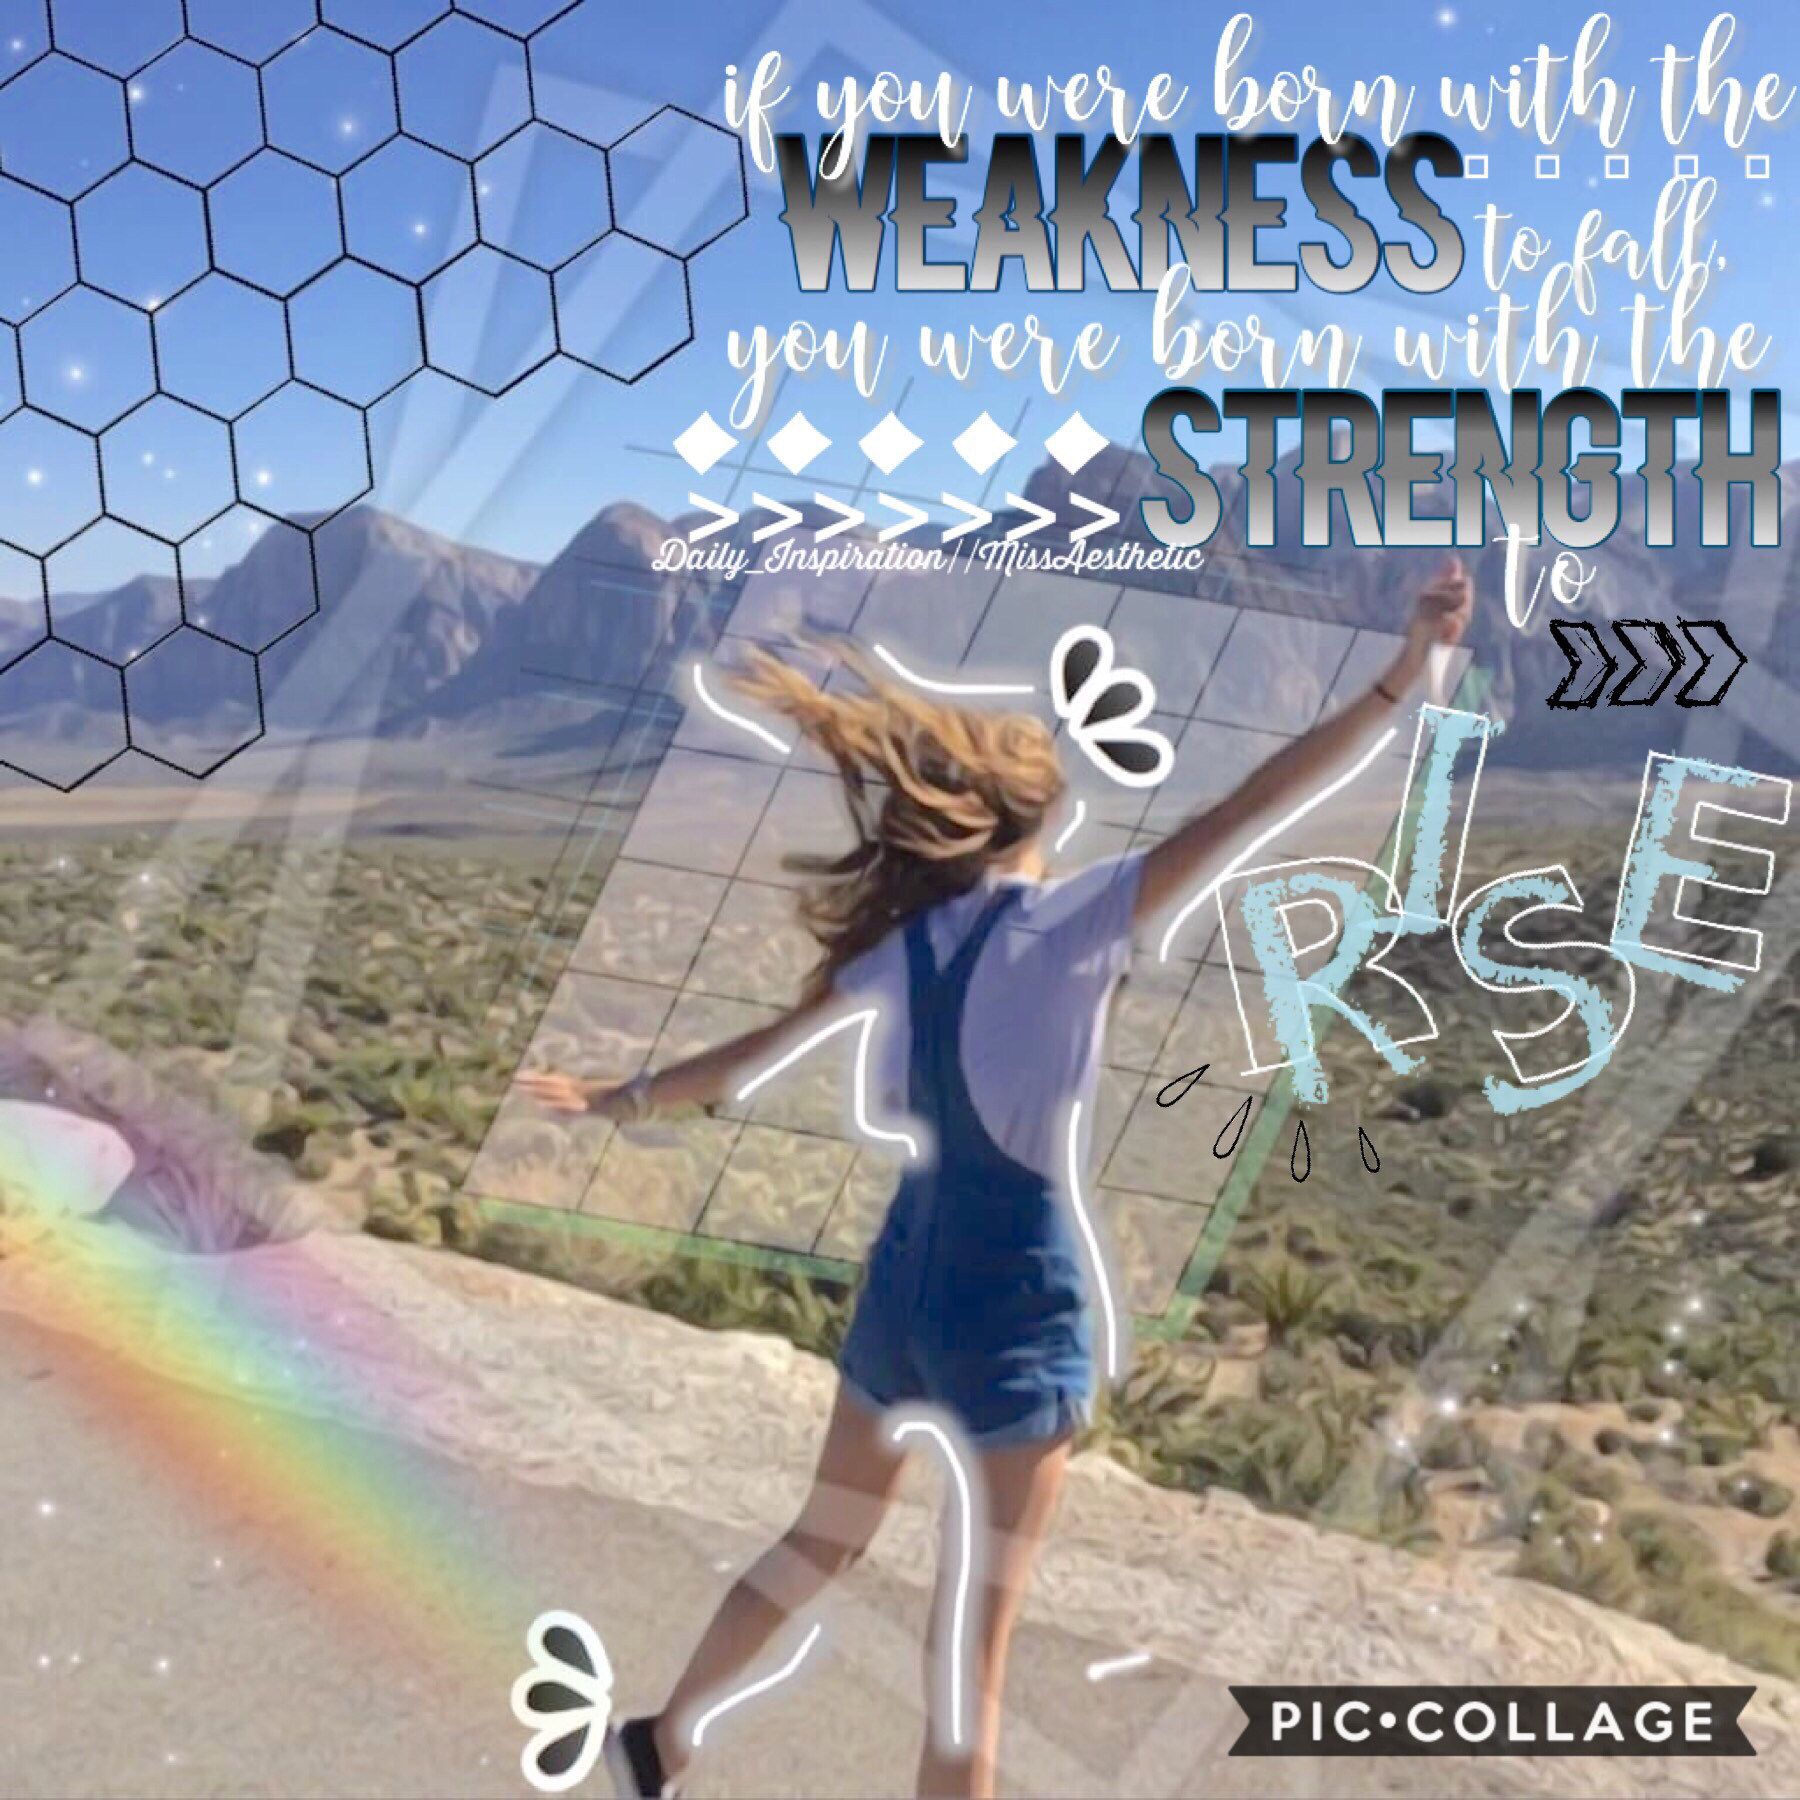 ✨tap✨
Here’s the inspiration of the day! This quote is so powerful! You always have the strength to rise!💗😊
This was a collab with MissAesthetic; she is sooo talented! Go check out her awesome collages!
QOTD:🍉or 🍓
AOTD: 🍓 
8/22/2018